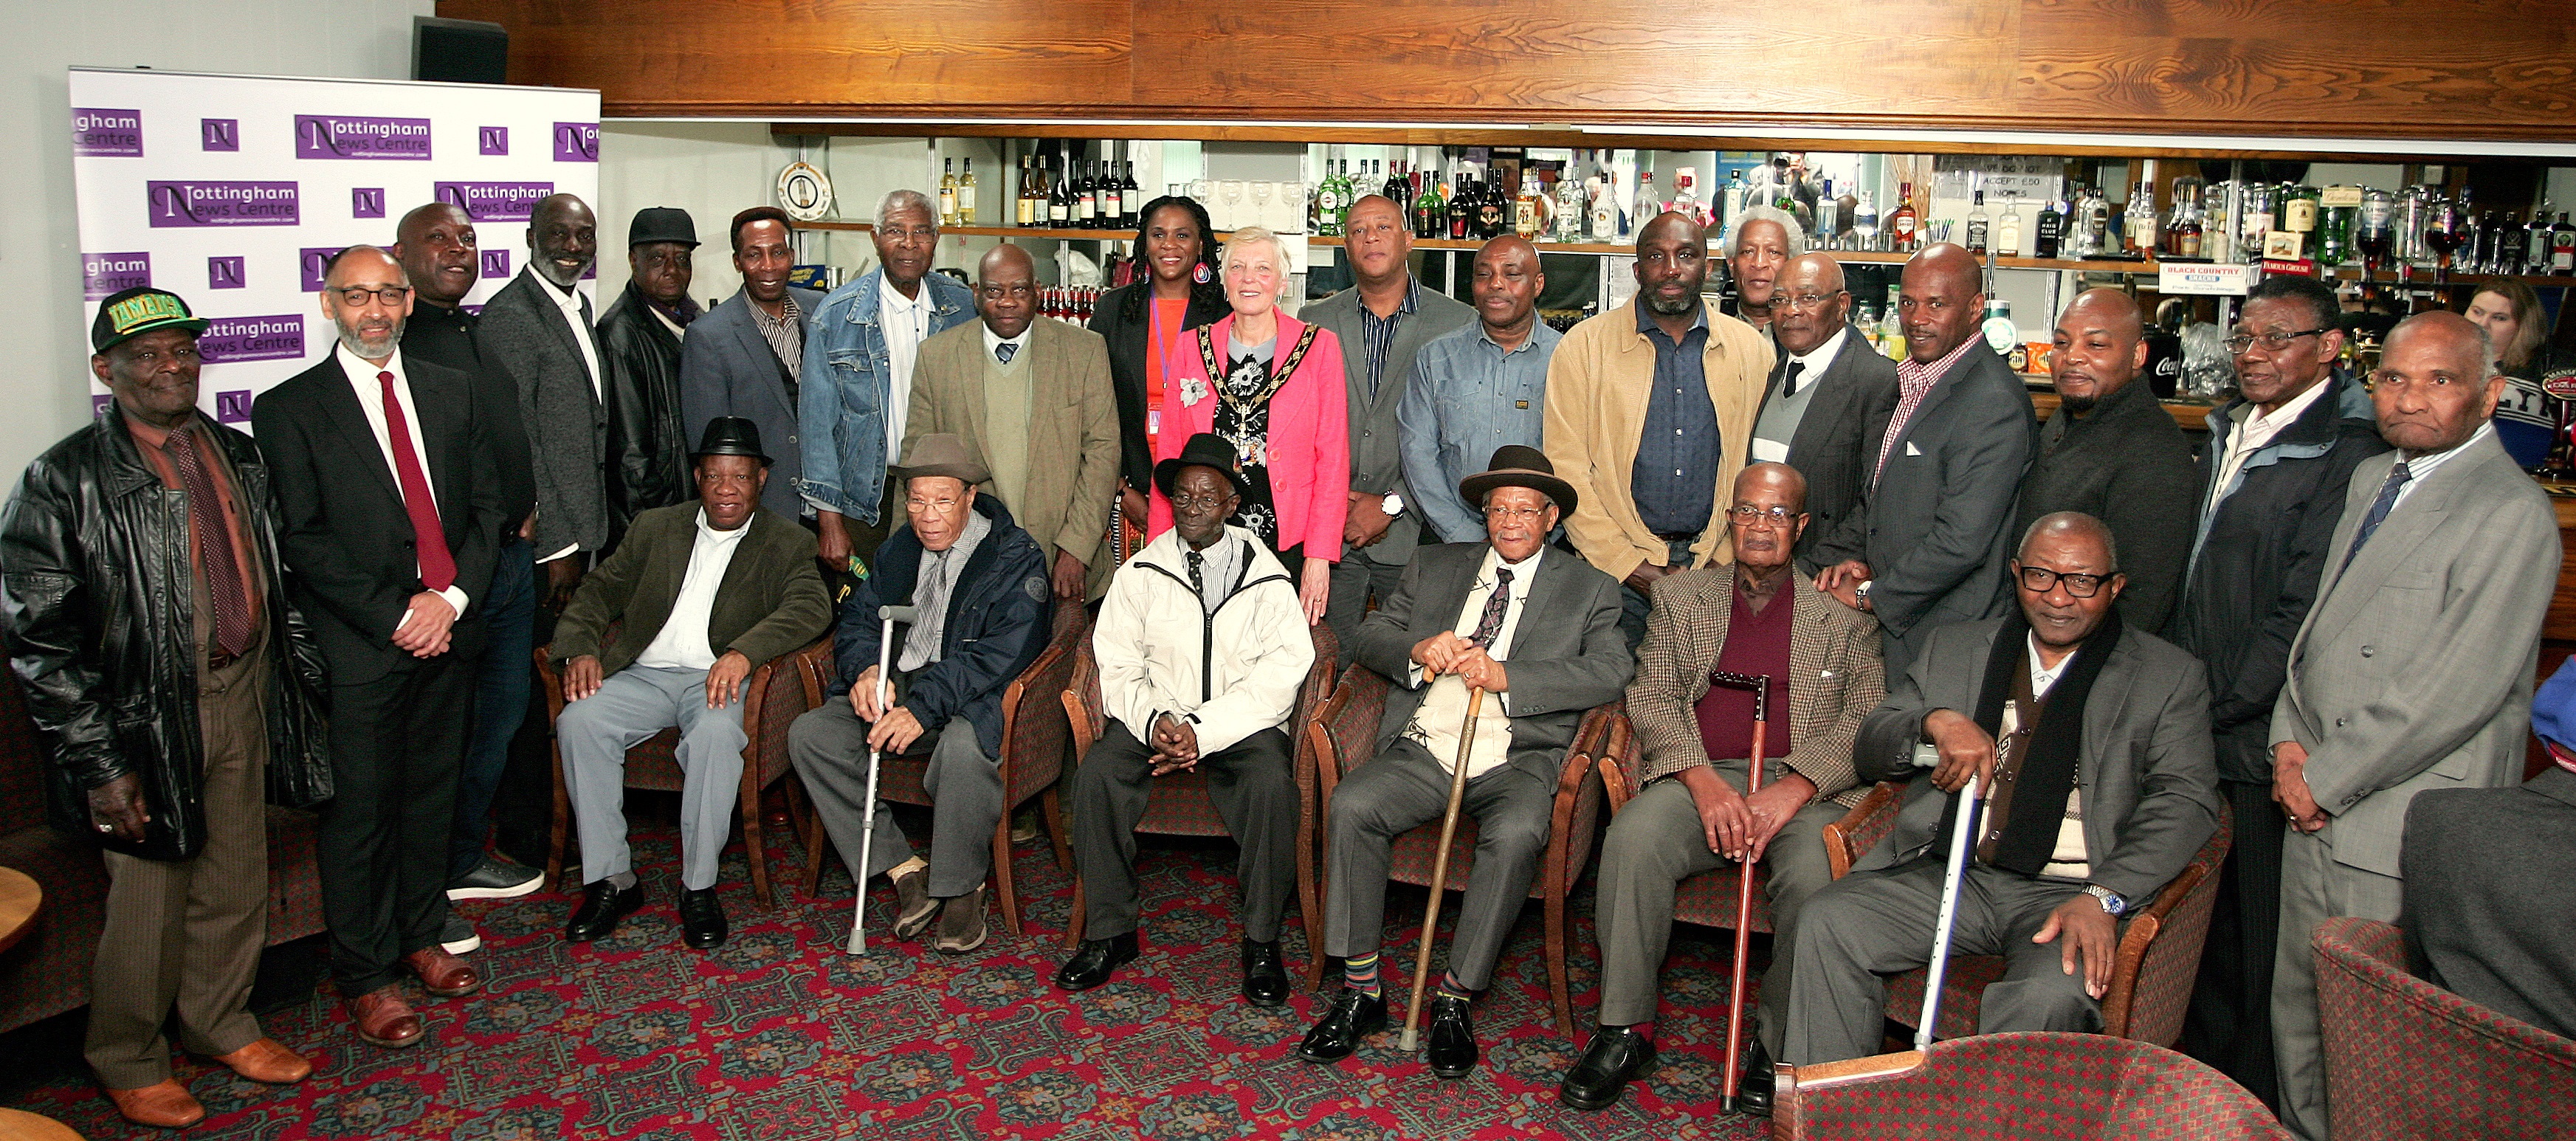 Former miners pose for a group photo at a reunion organised by the Black Miners Museum.